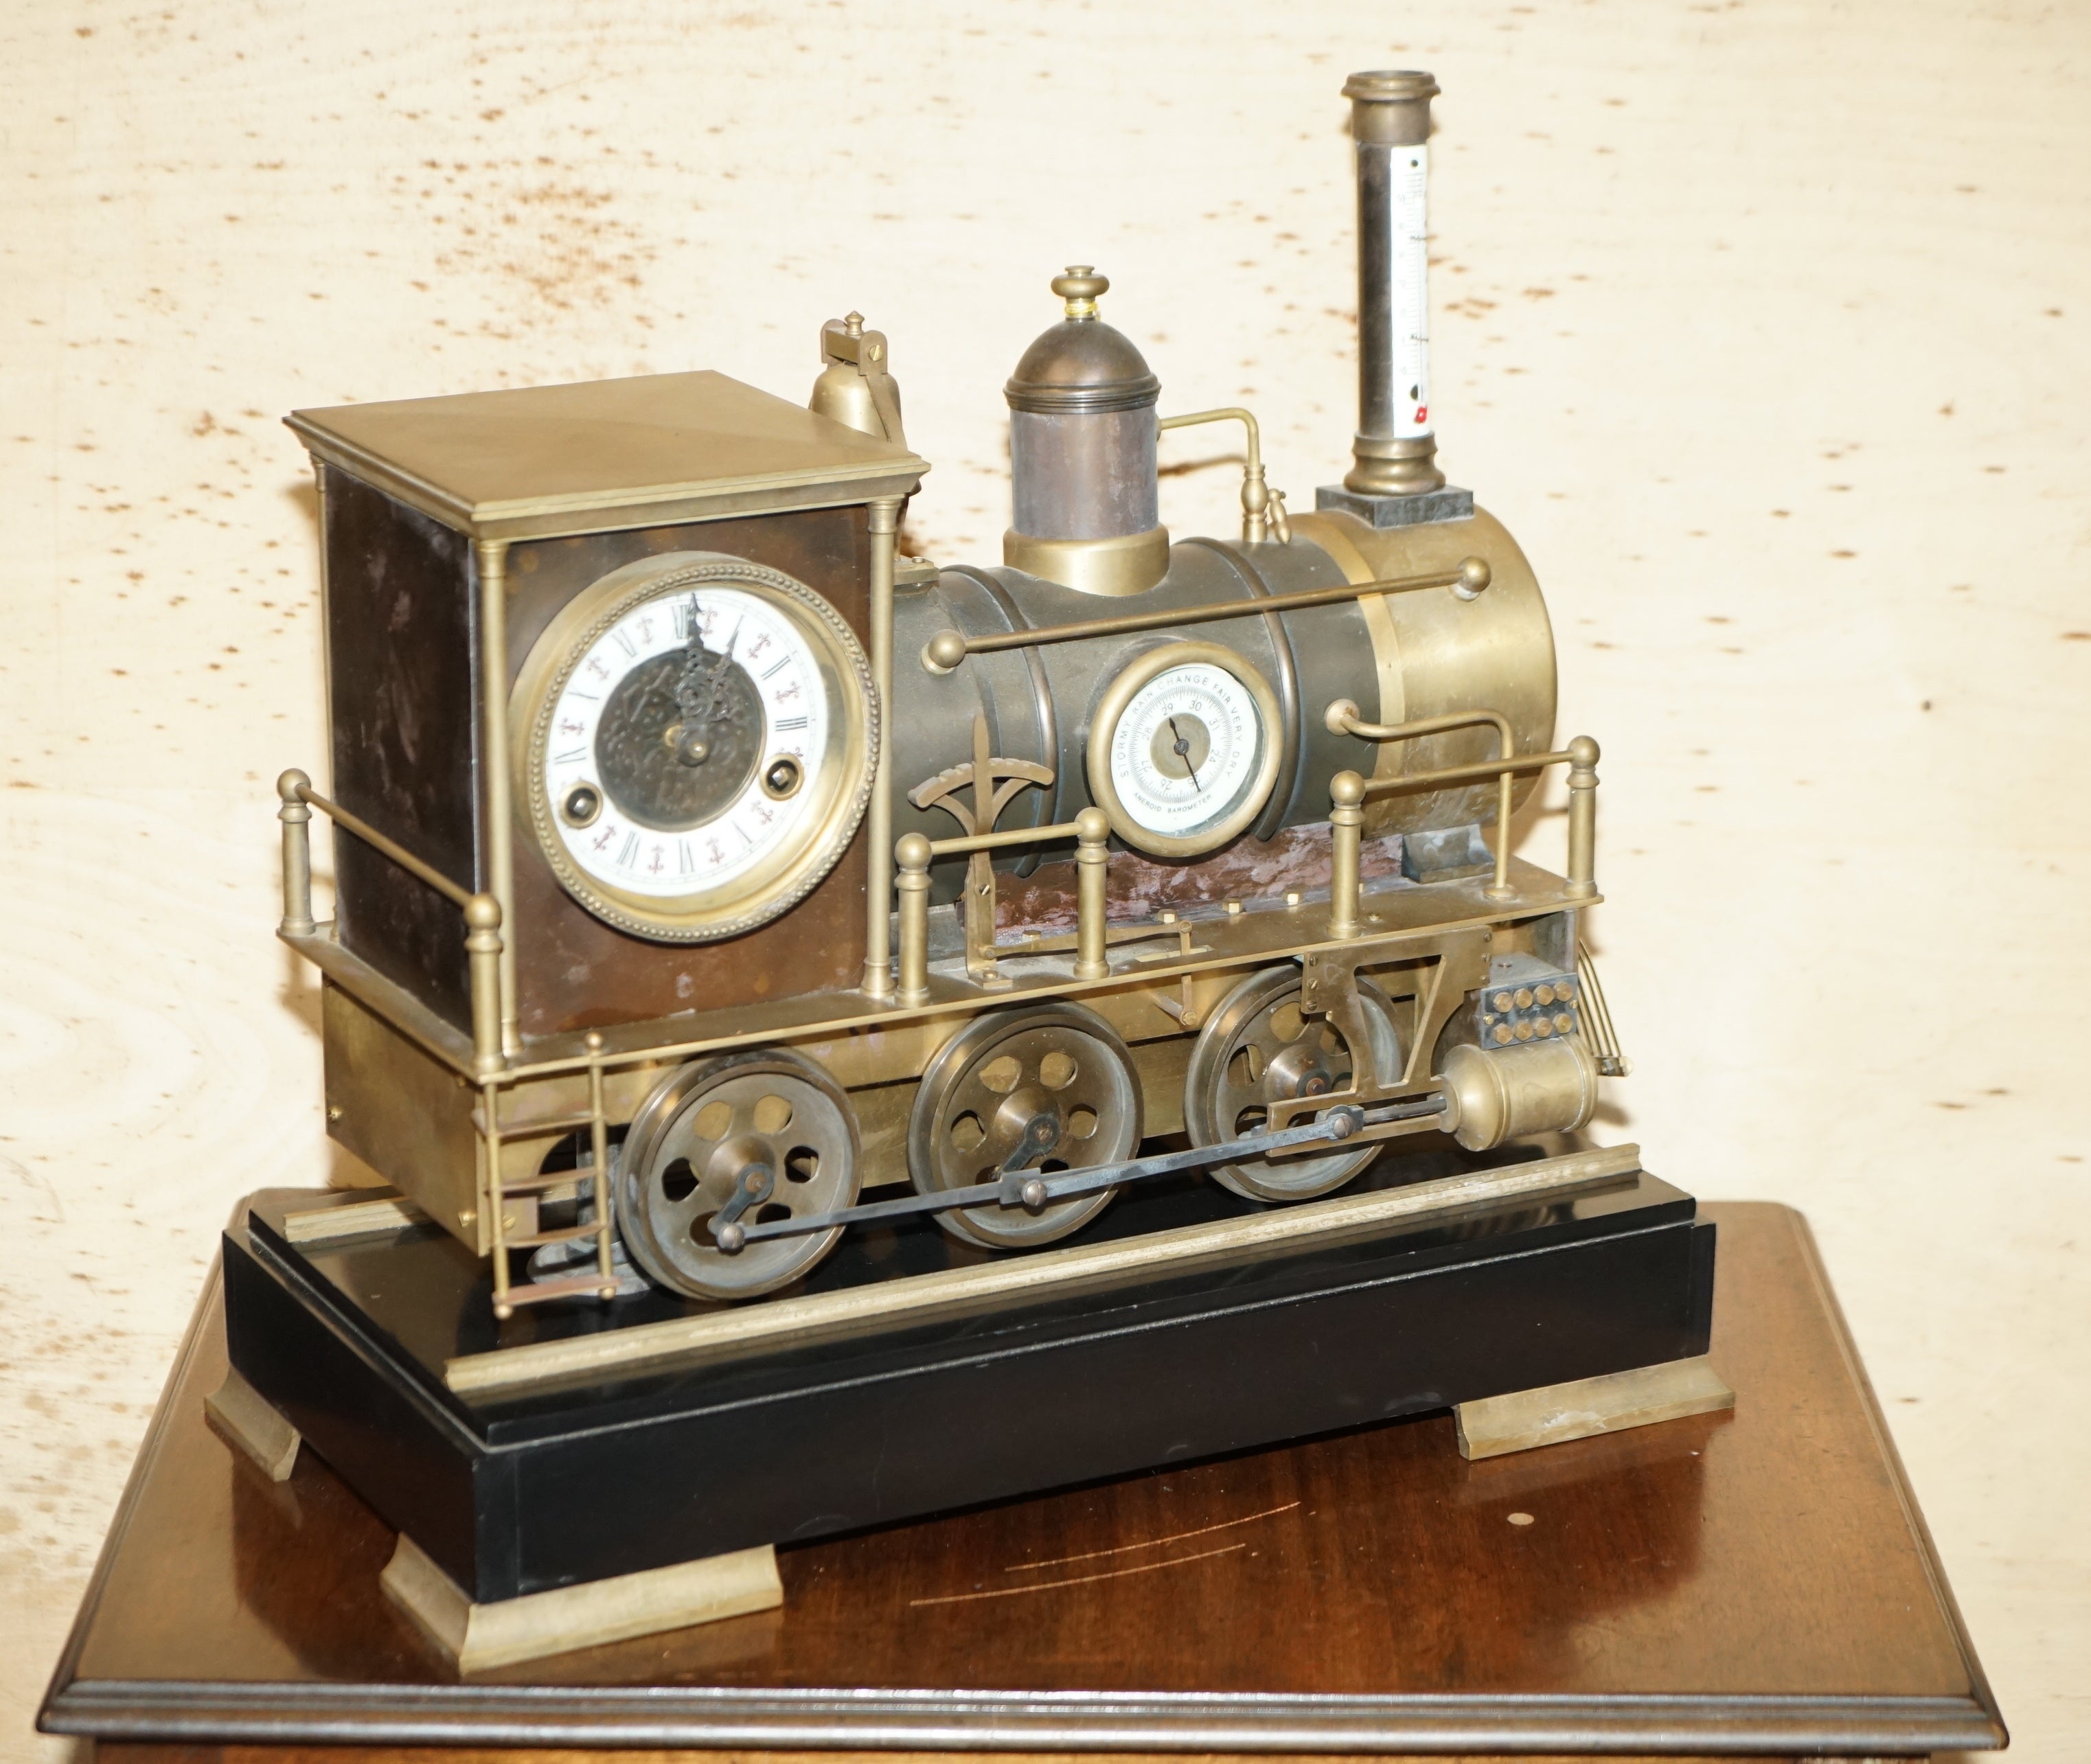 Royal House Antiques

Royal House Antiques is delighted to offer for sale this very fine and highly collectable Antique circa 1895 French Automaton Industrial Locomotive moving gilt bronze clock sitting on top of a solid marble base with bronze